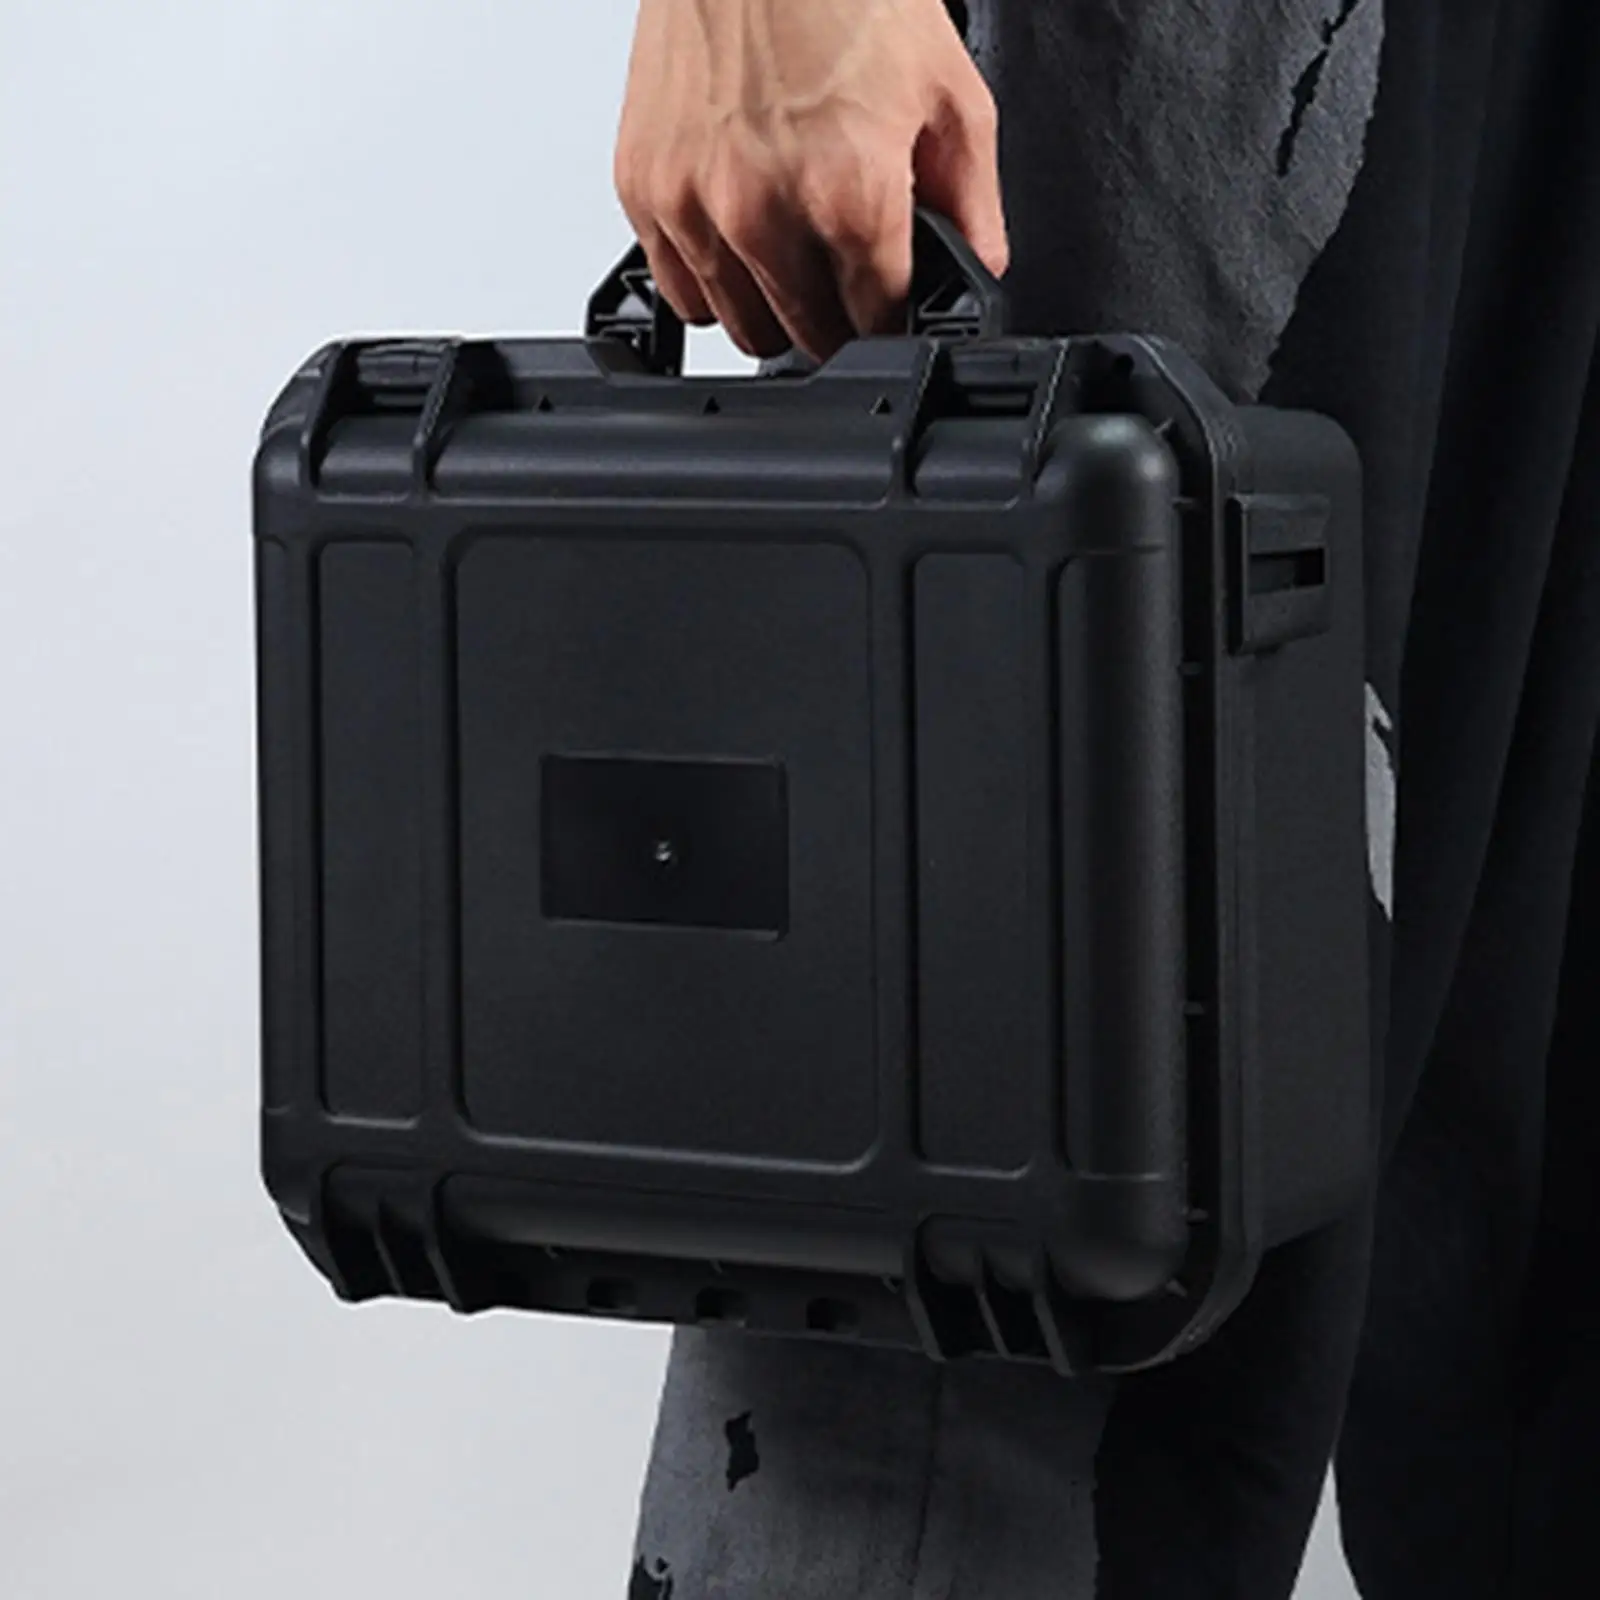 Portable Drone Carrying Case Travel Case Storage Box Shockproof Suitcaseg Storage Bag for DJI Mini 3 Pro Protector Parts